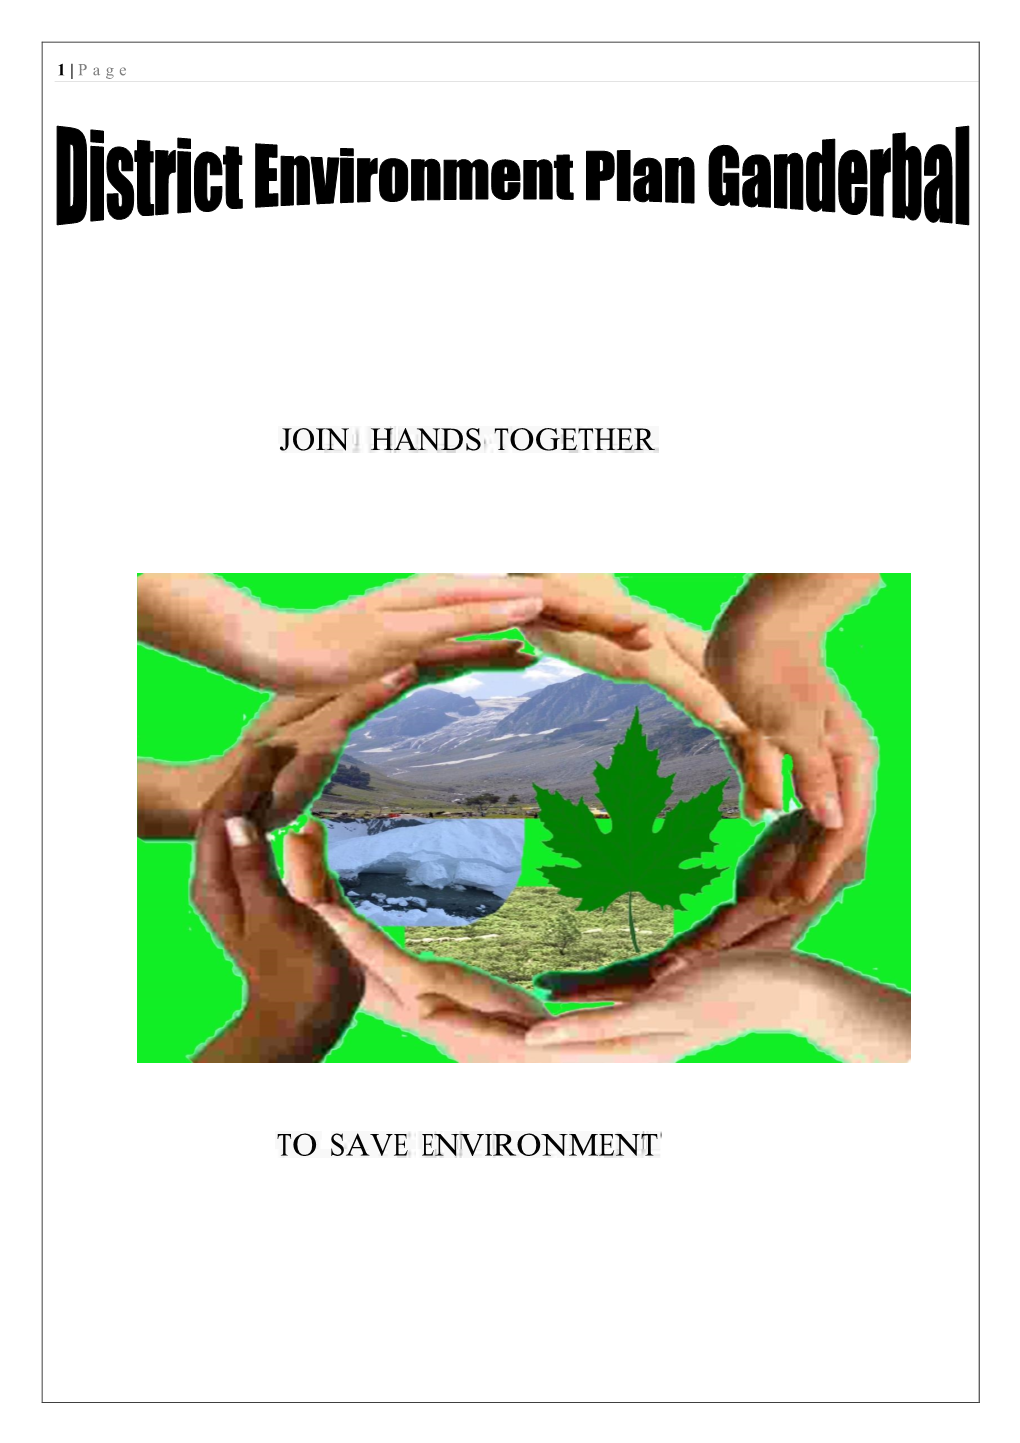 Join Hands Together to Save Environment